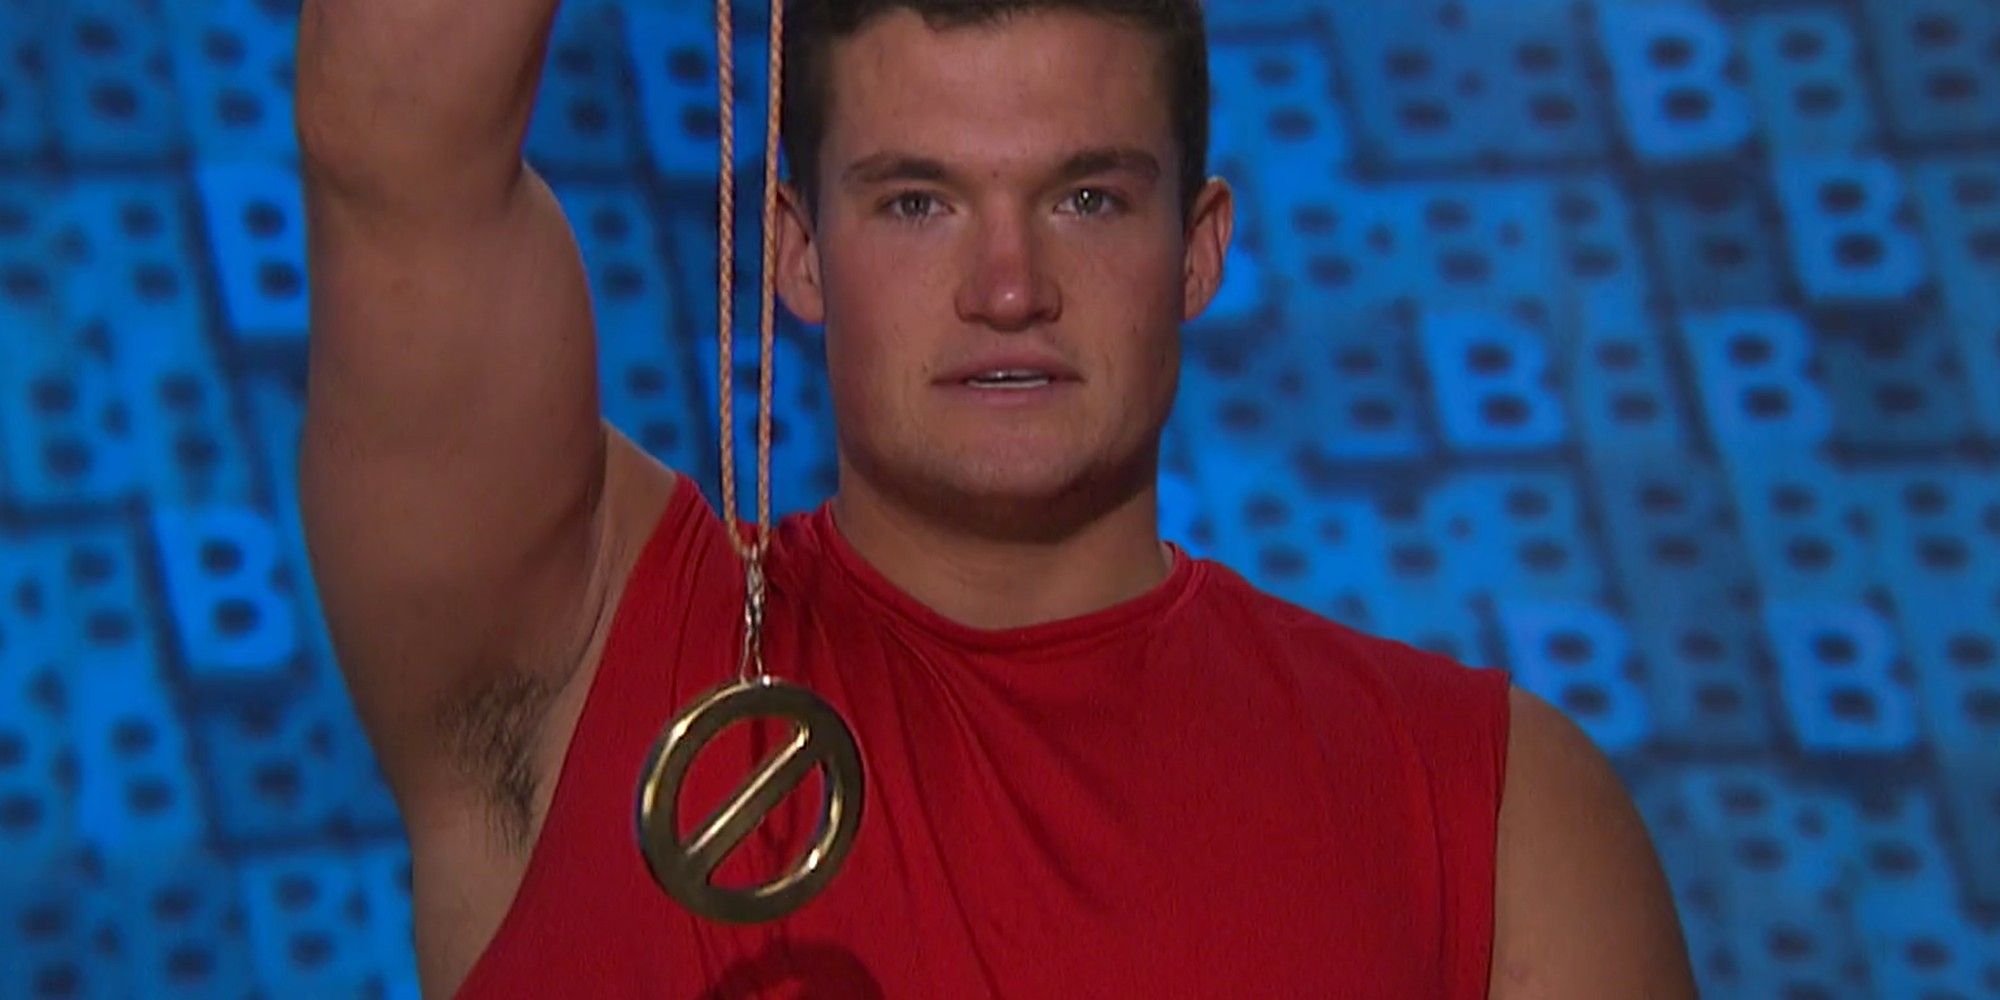 Jackson shows off Power Of Veto victory on Big Brother